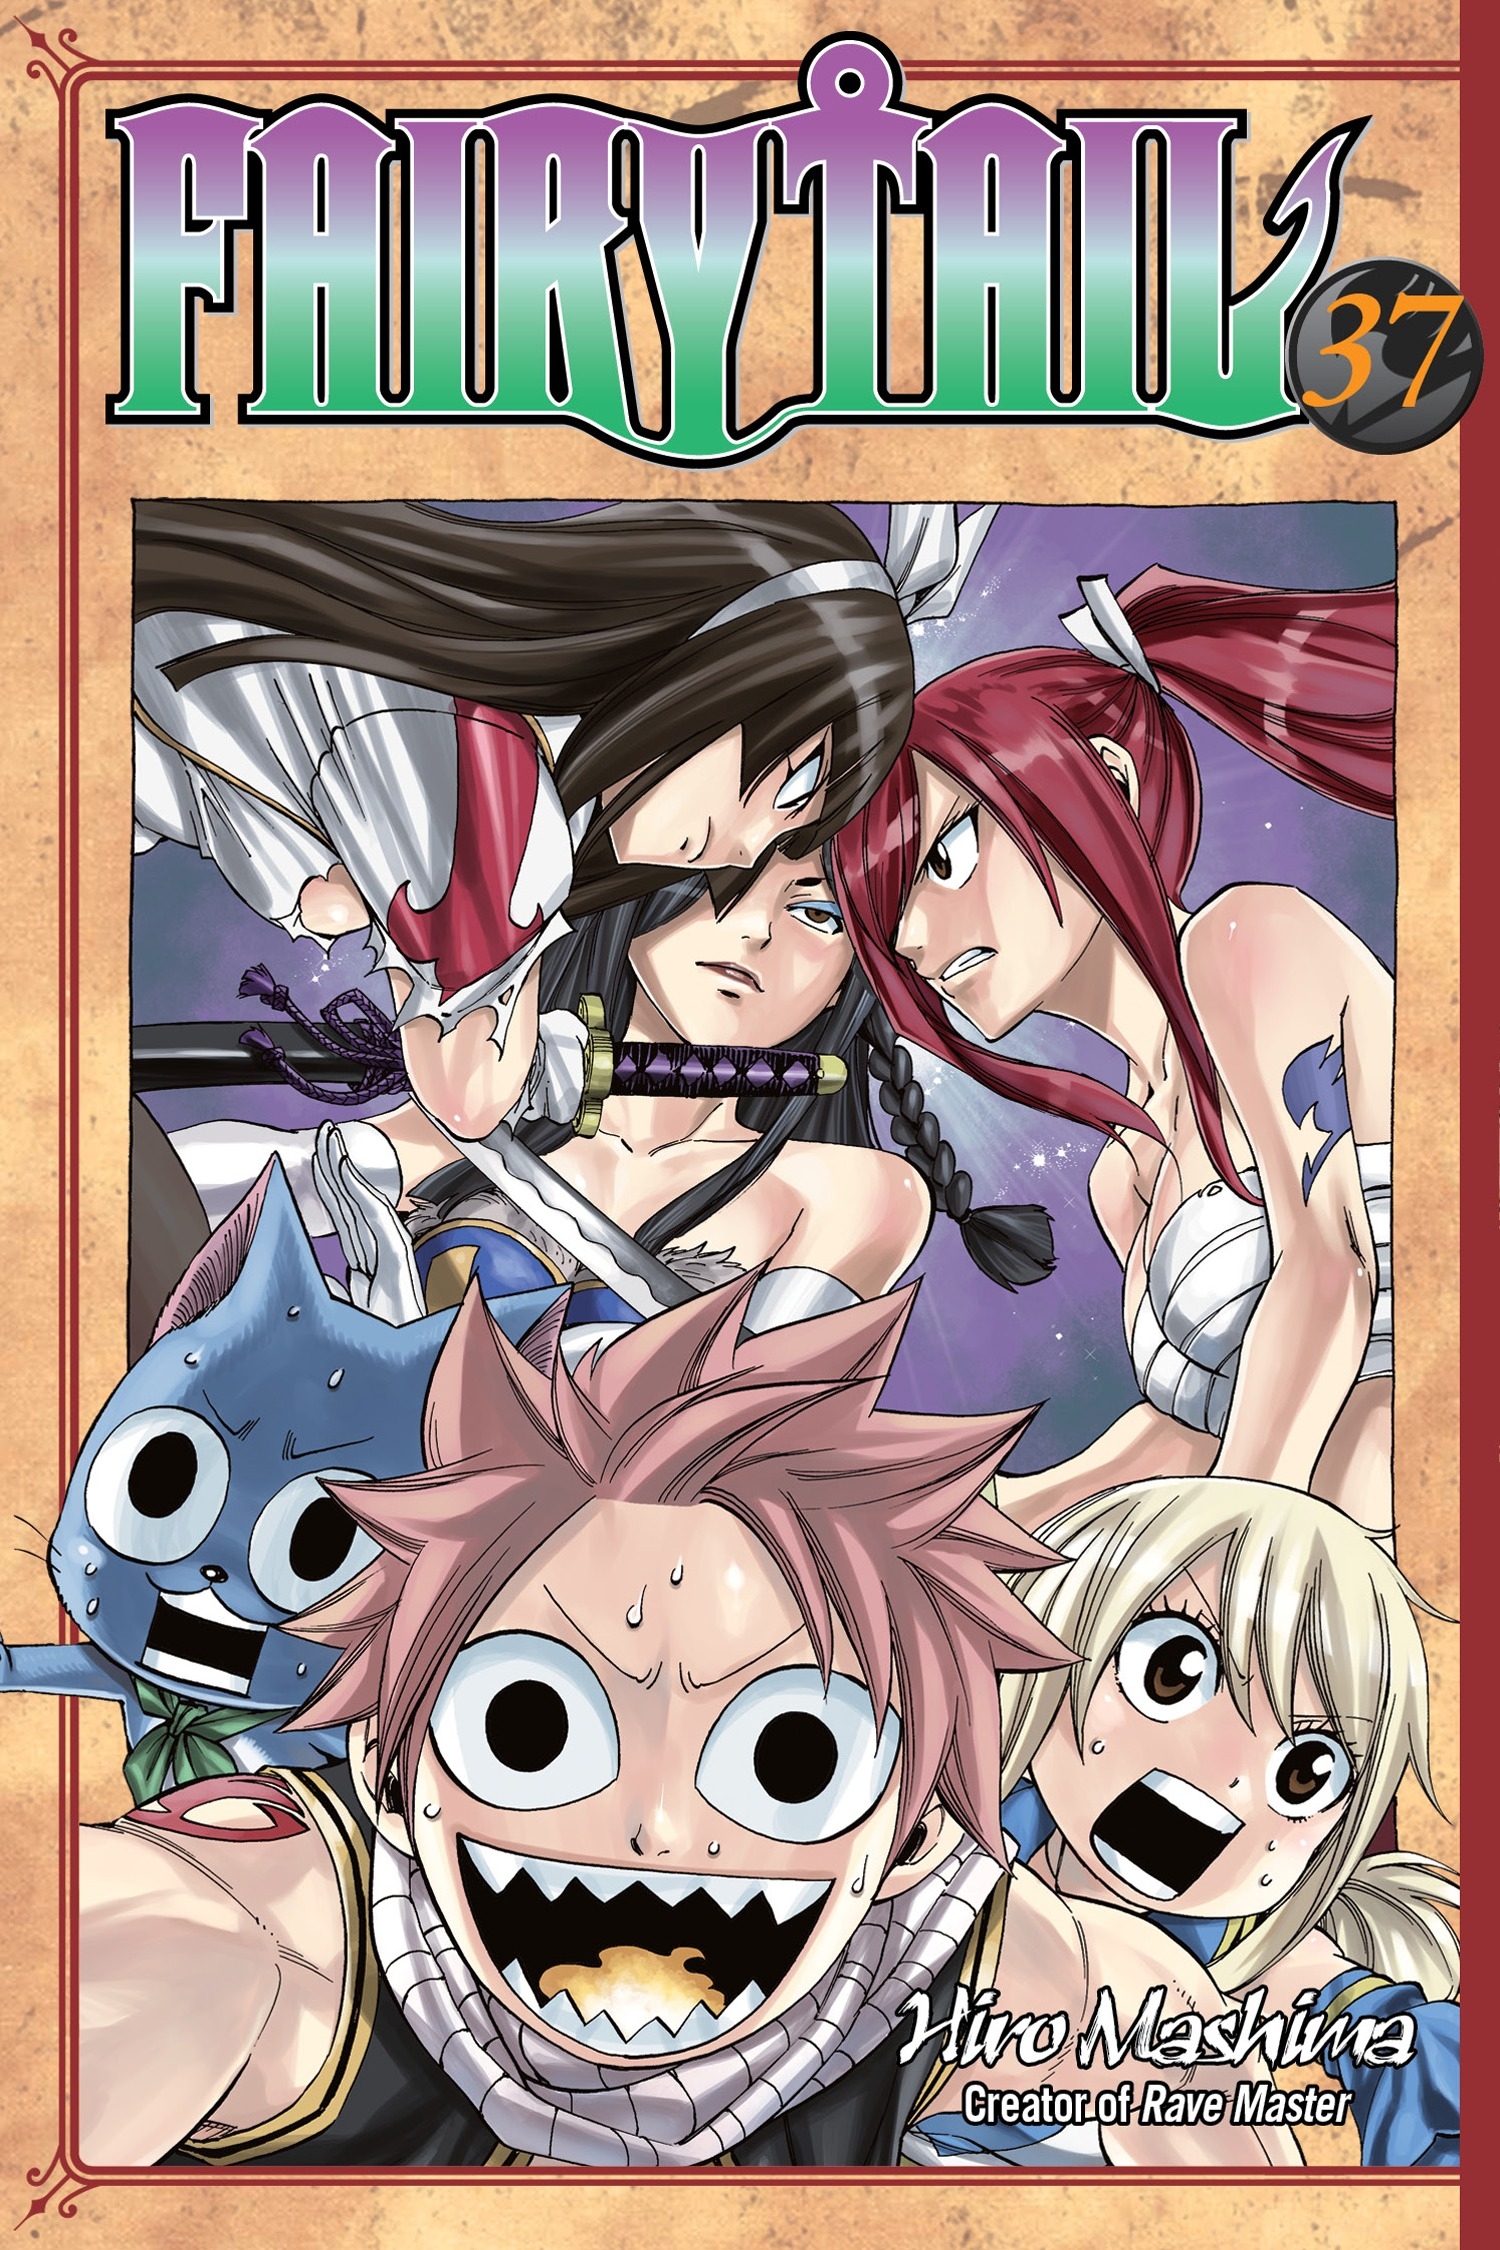 Fairy Tail Anime Returns in April 2014